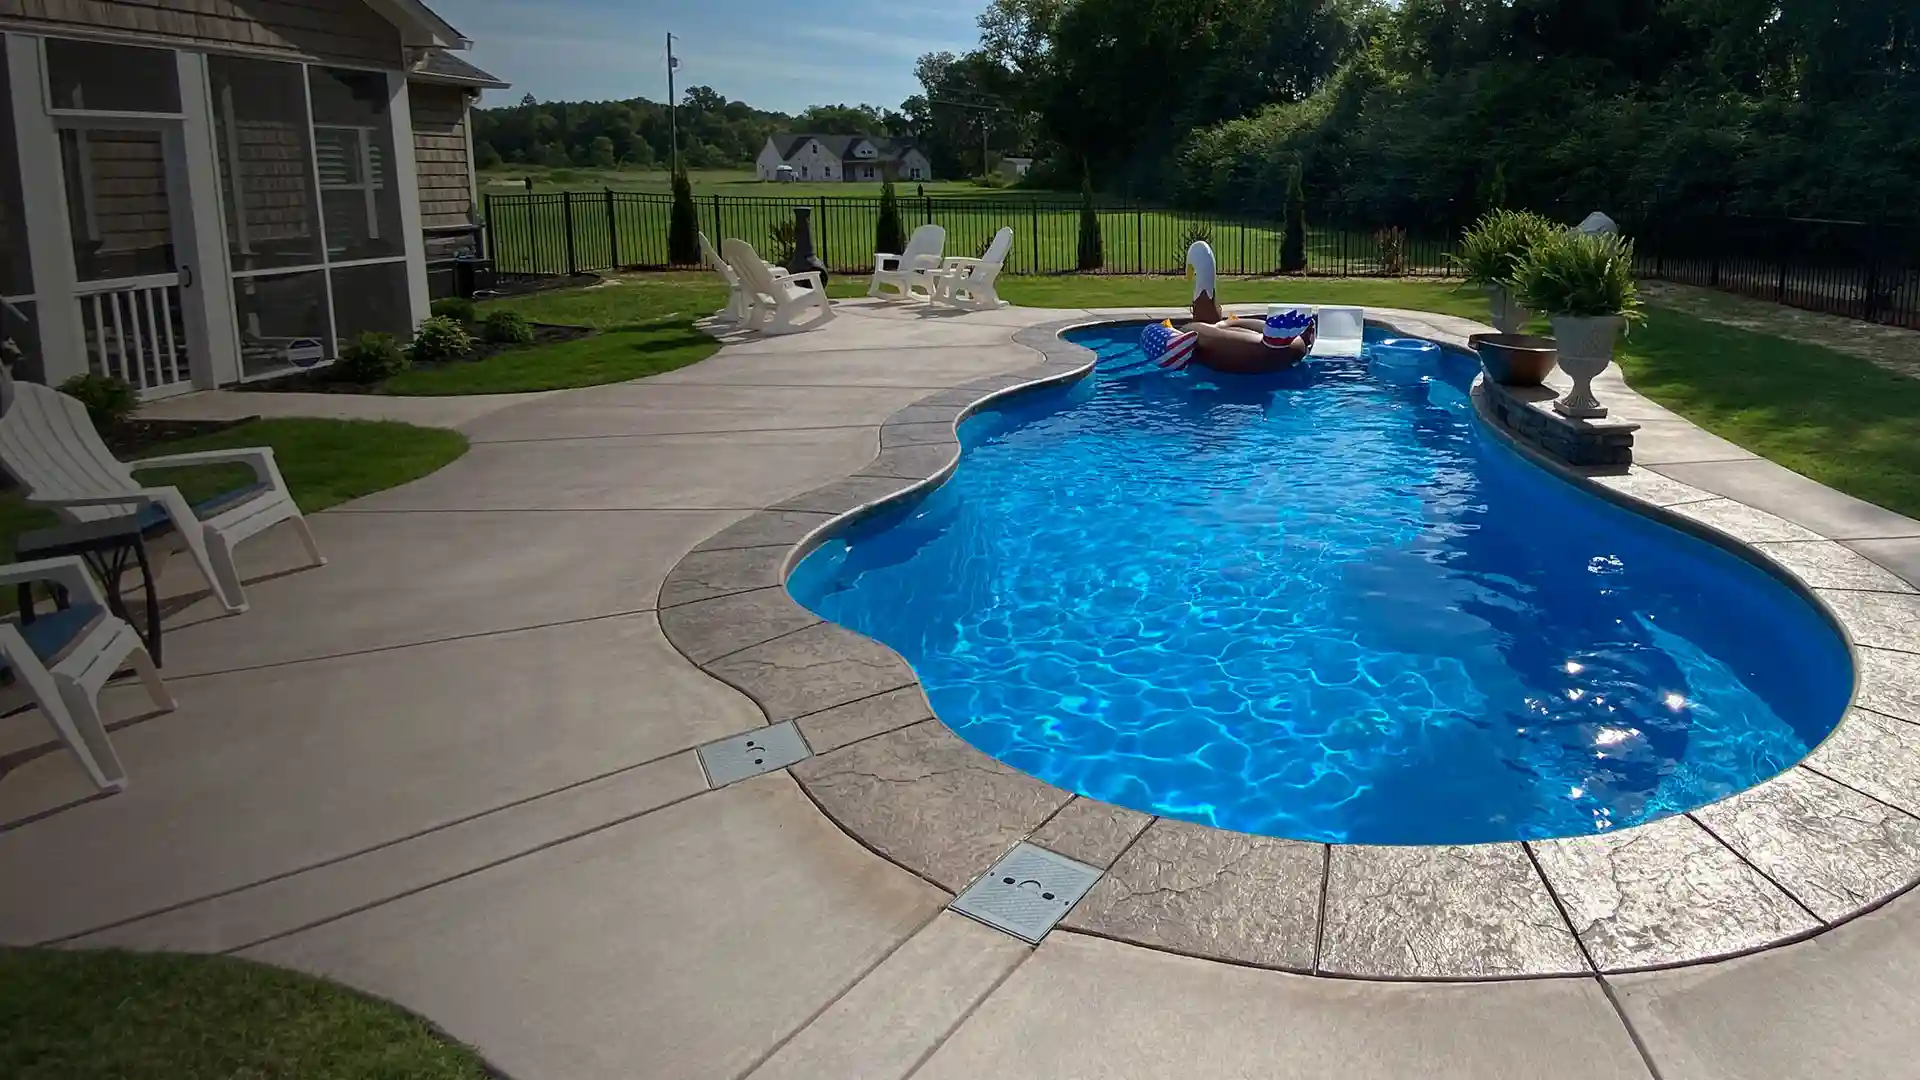 Picture of an inground fiberglass pool installed by pool builders in North Carolina.